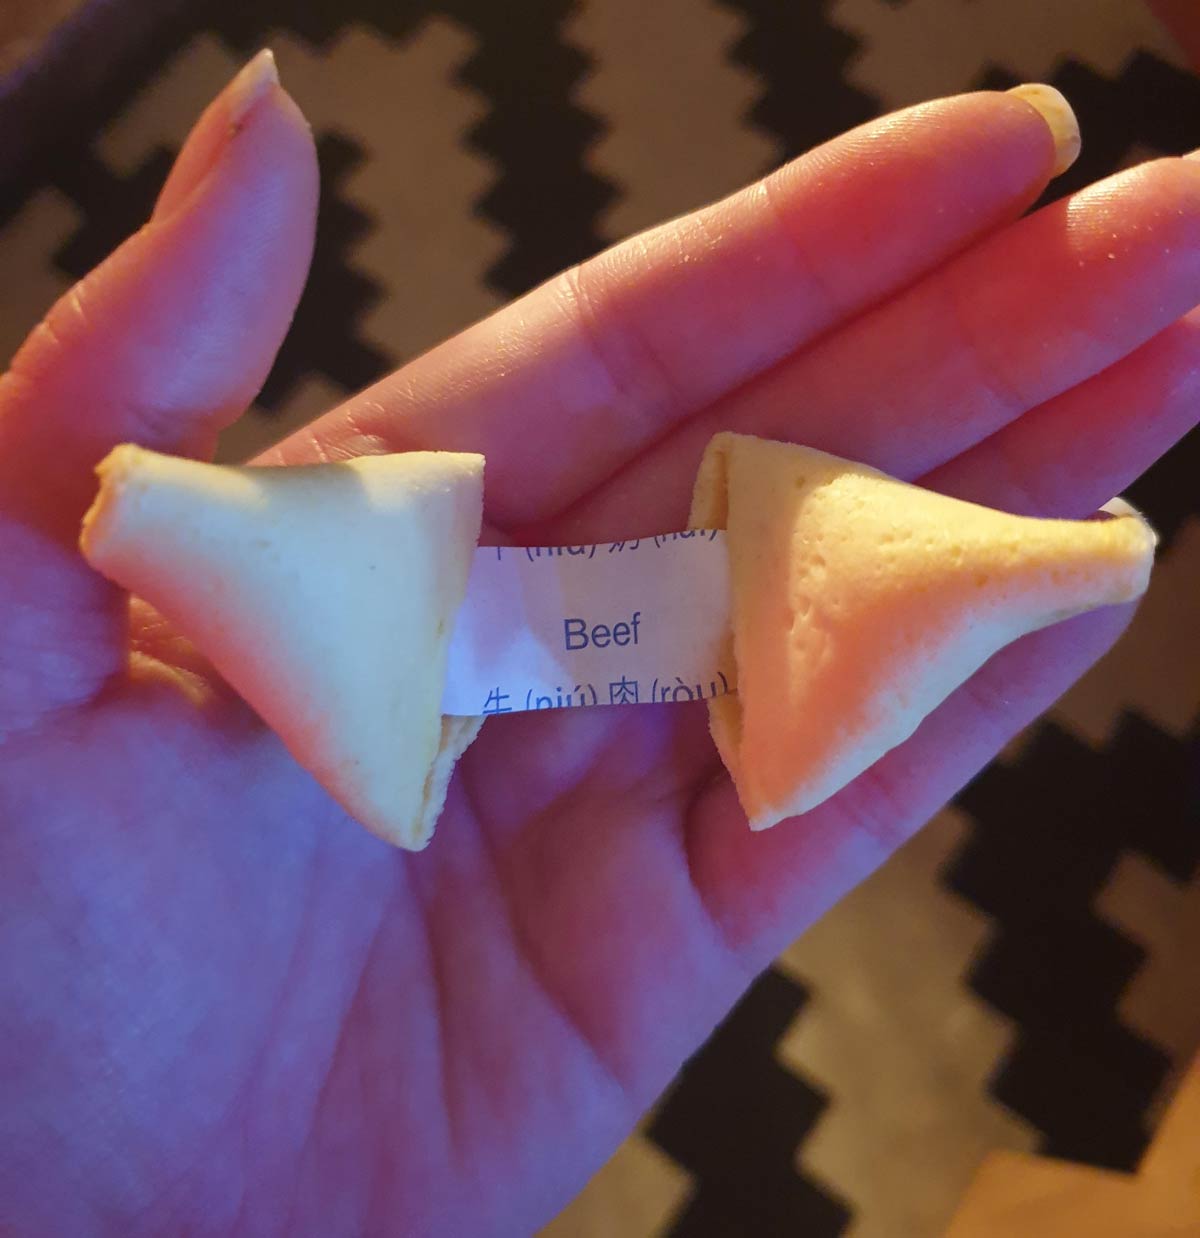 I was looking forward to this fortune, and I got..